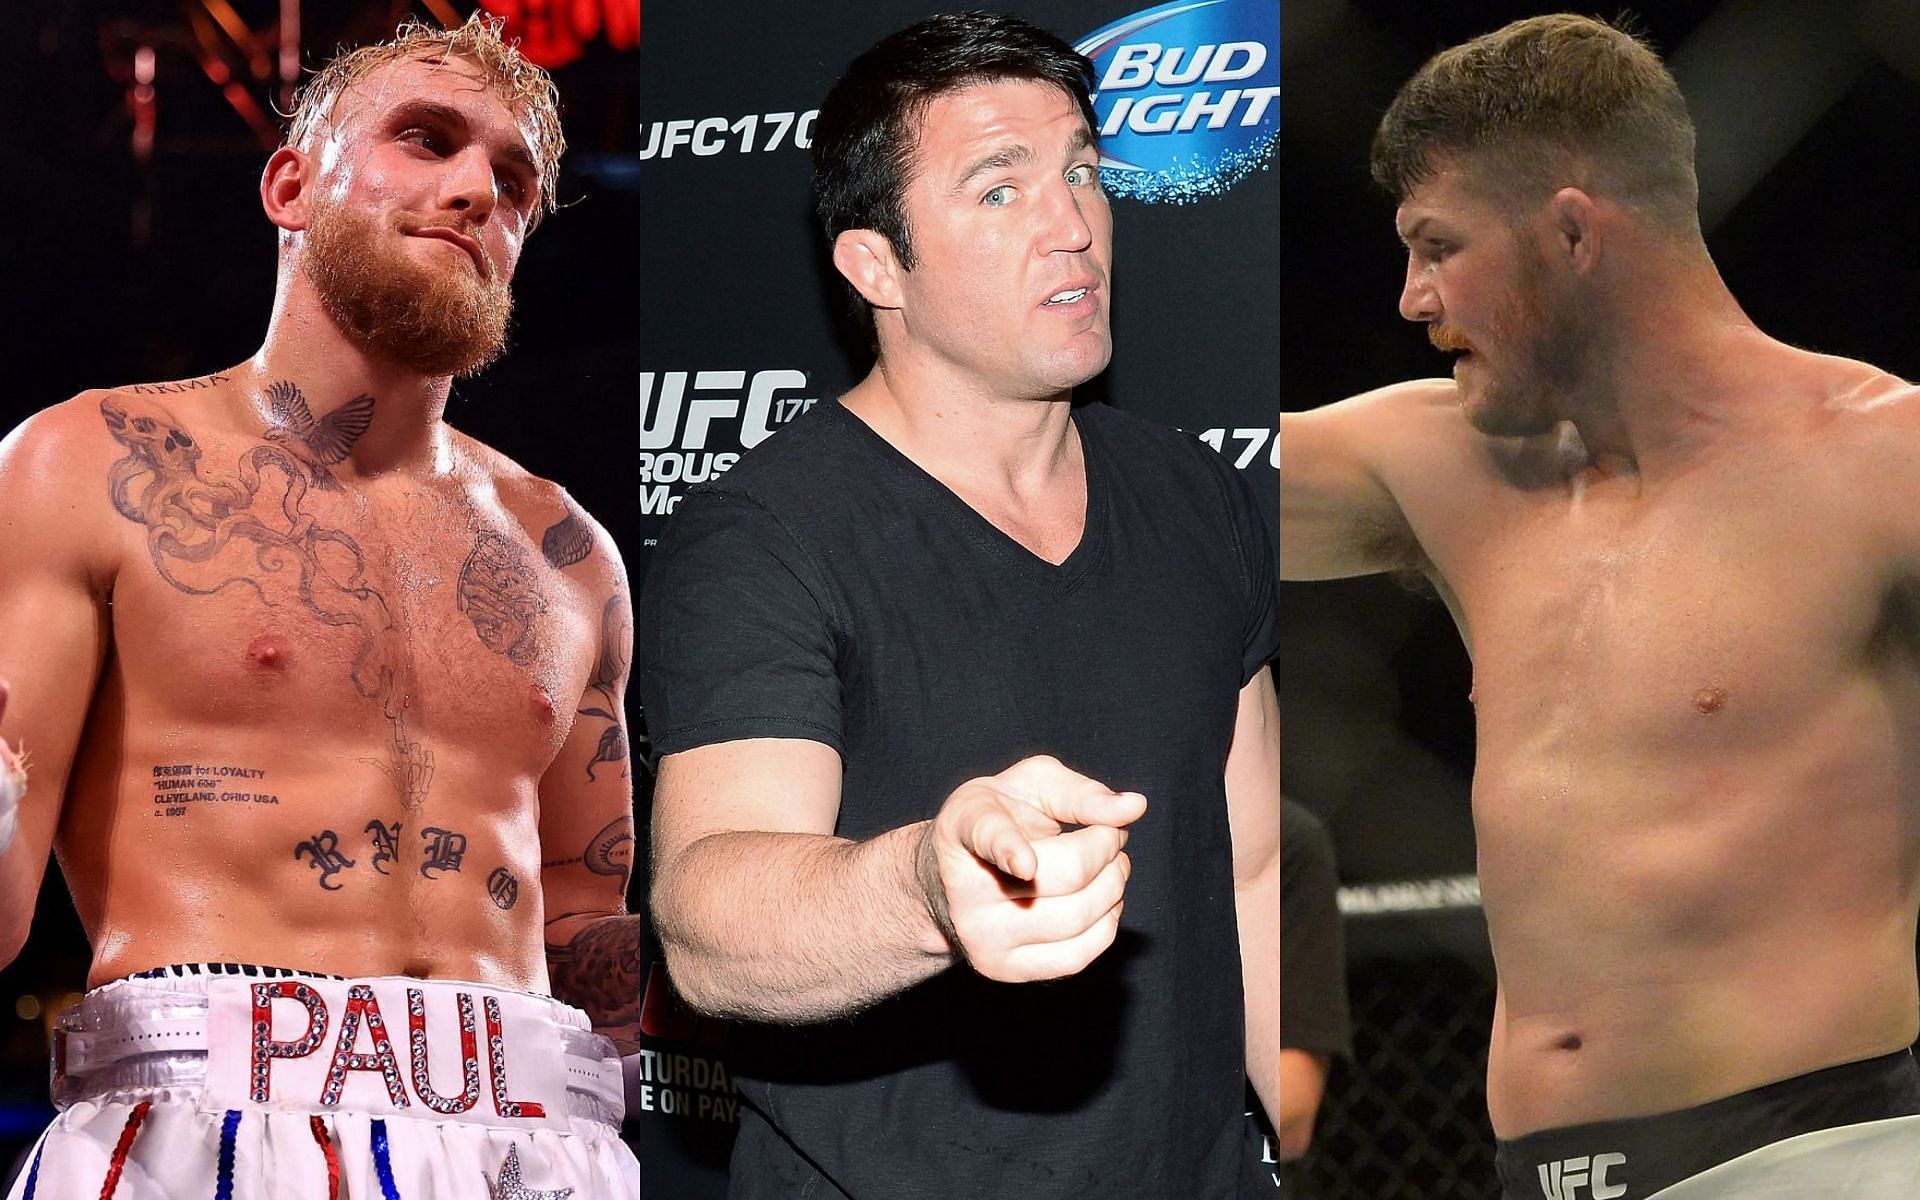 L-R: Jake Paul, Chael Sonnen, and Michael Bisping